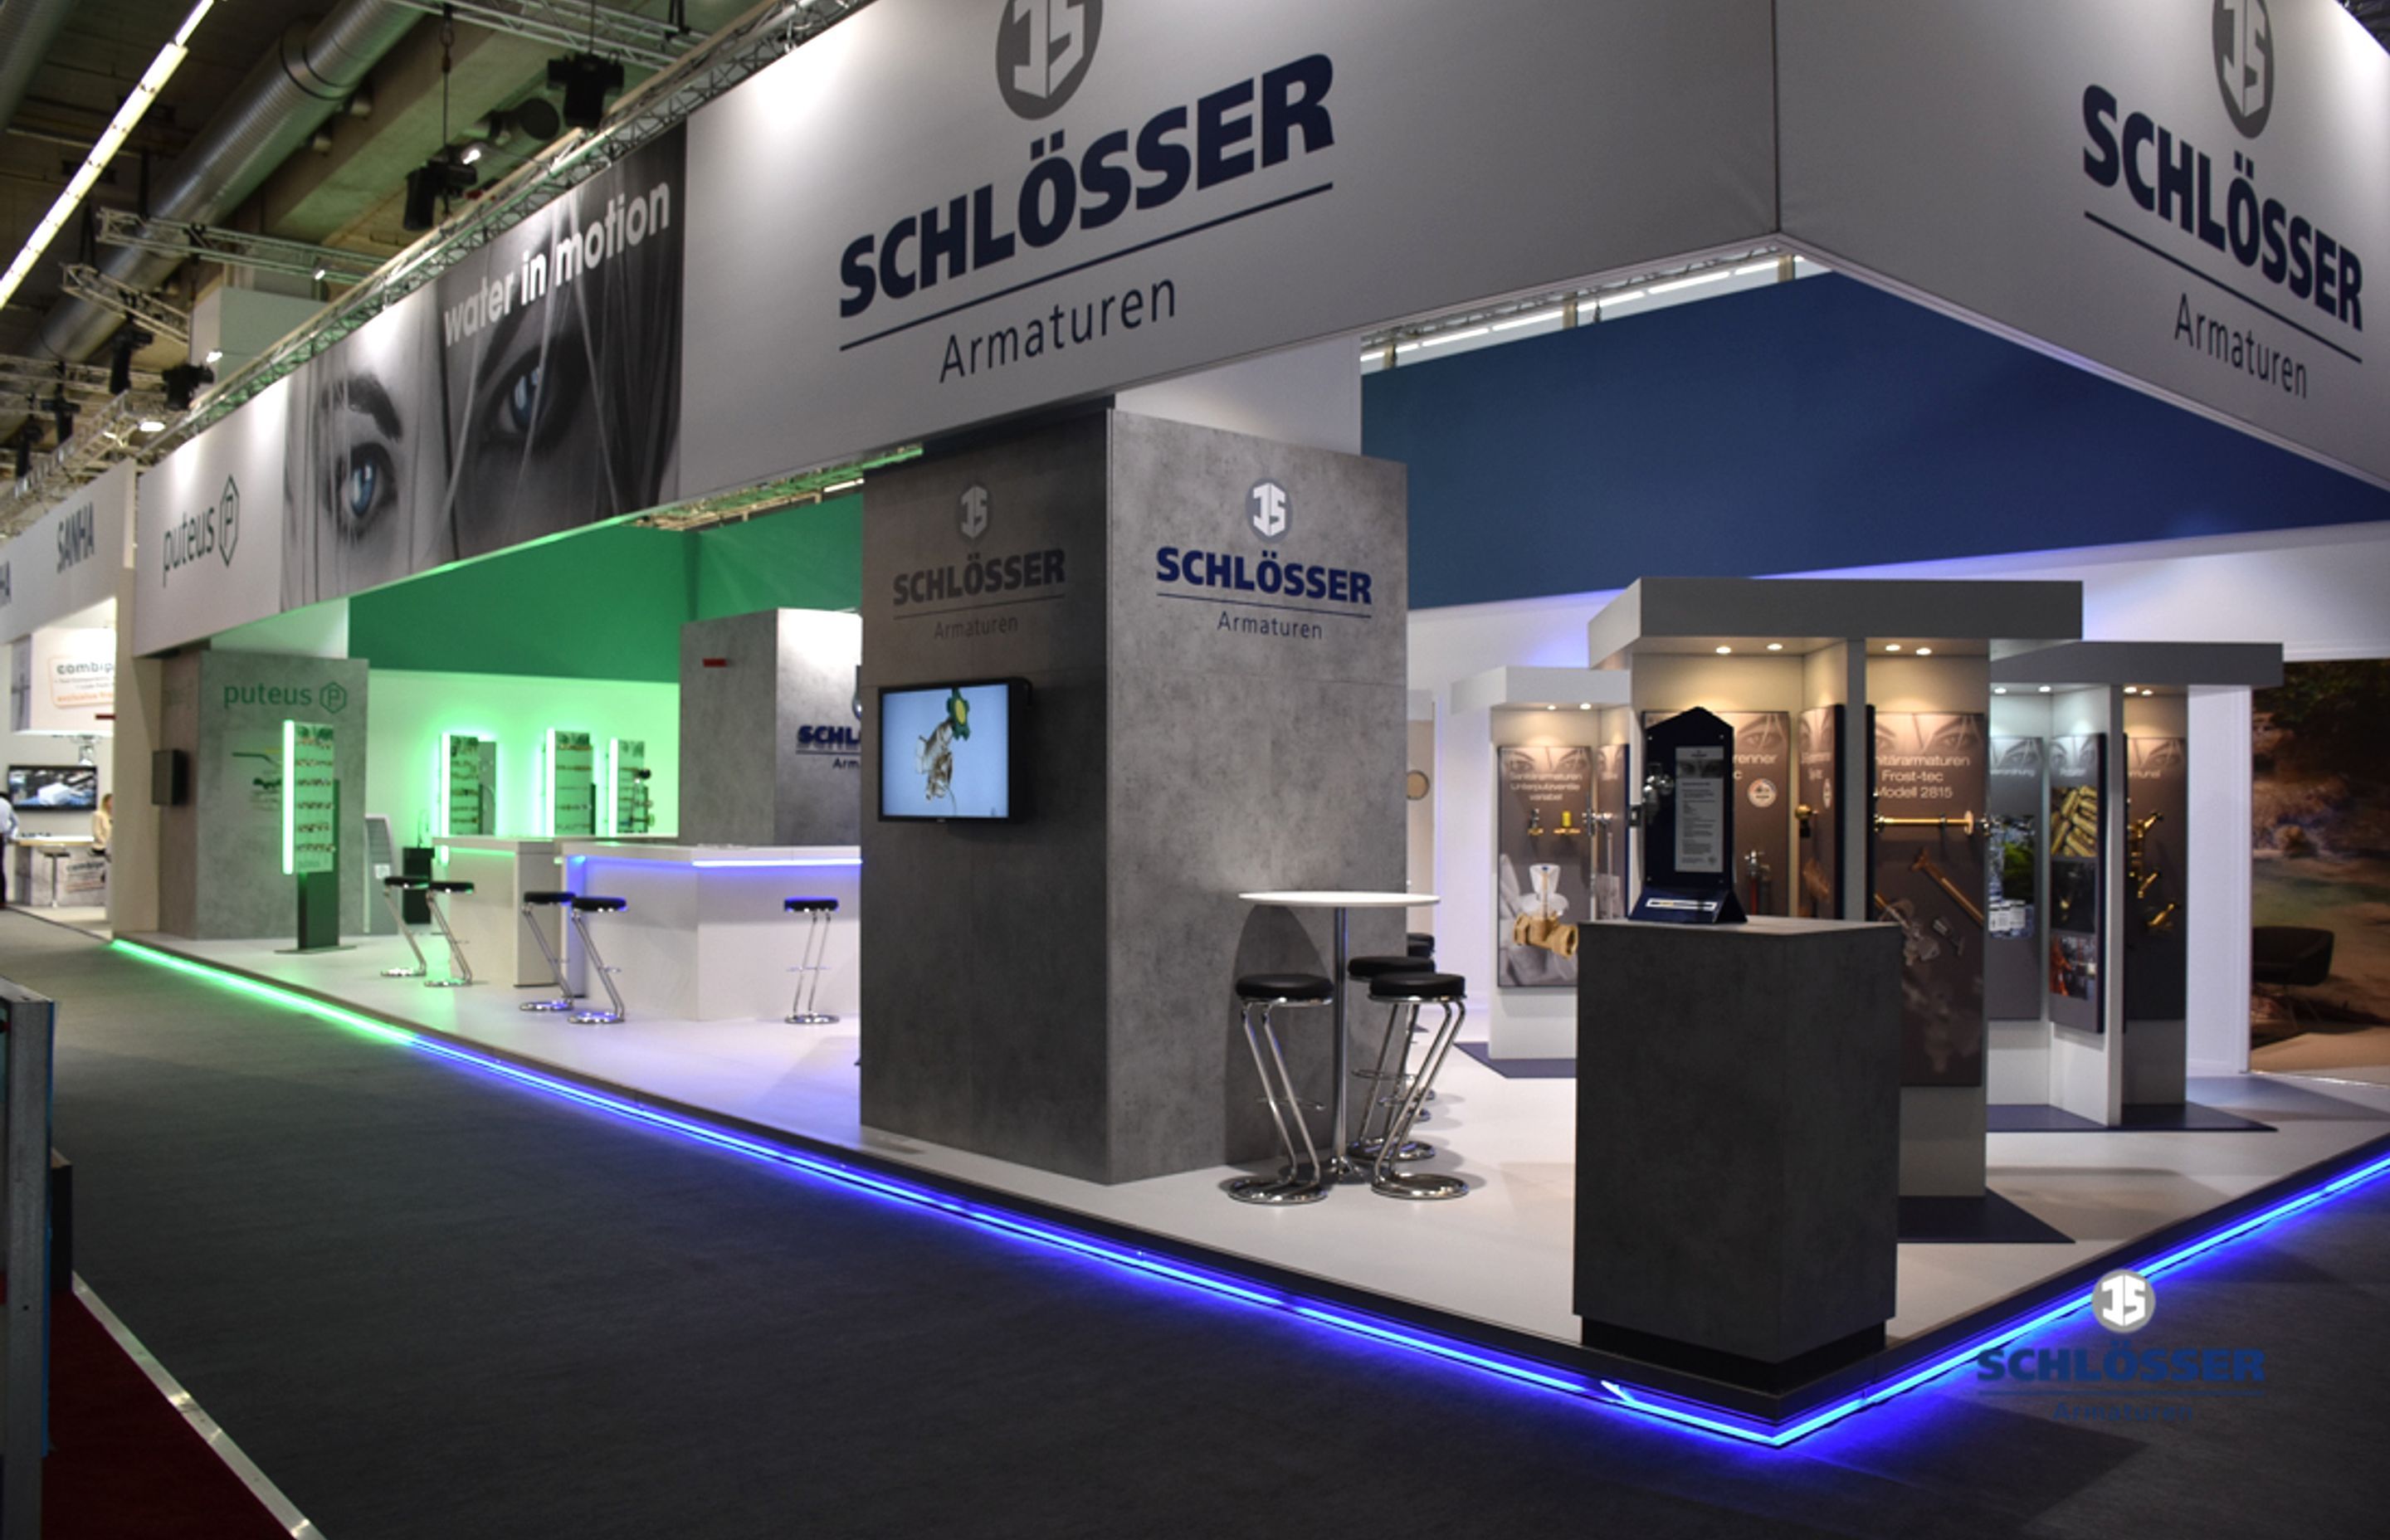 Schlösser: Tradition and Innovation is the Key to Success